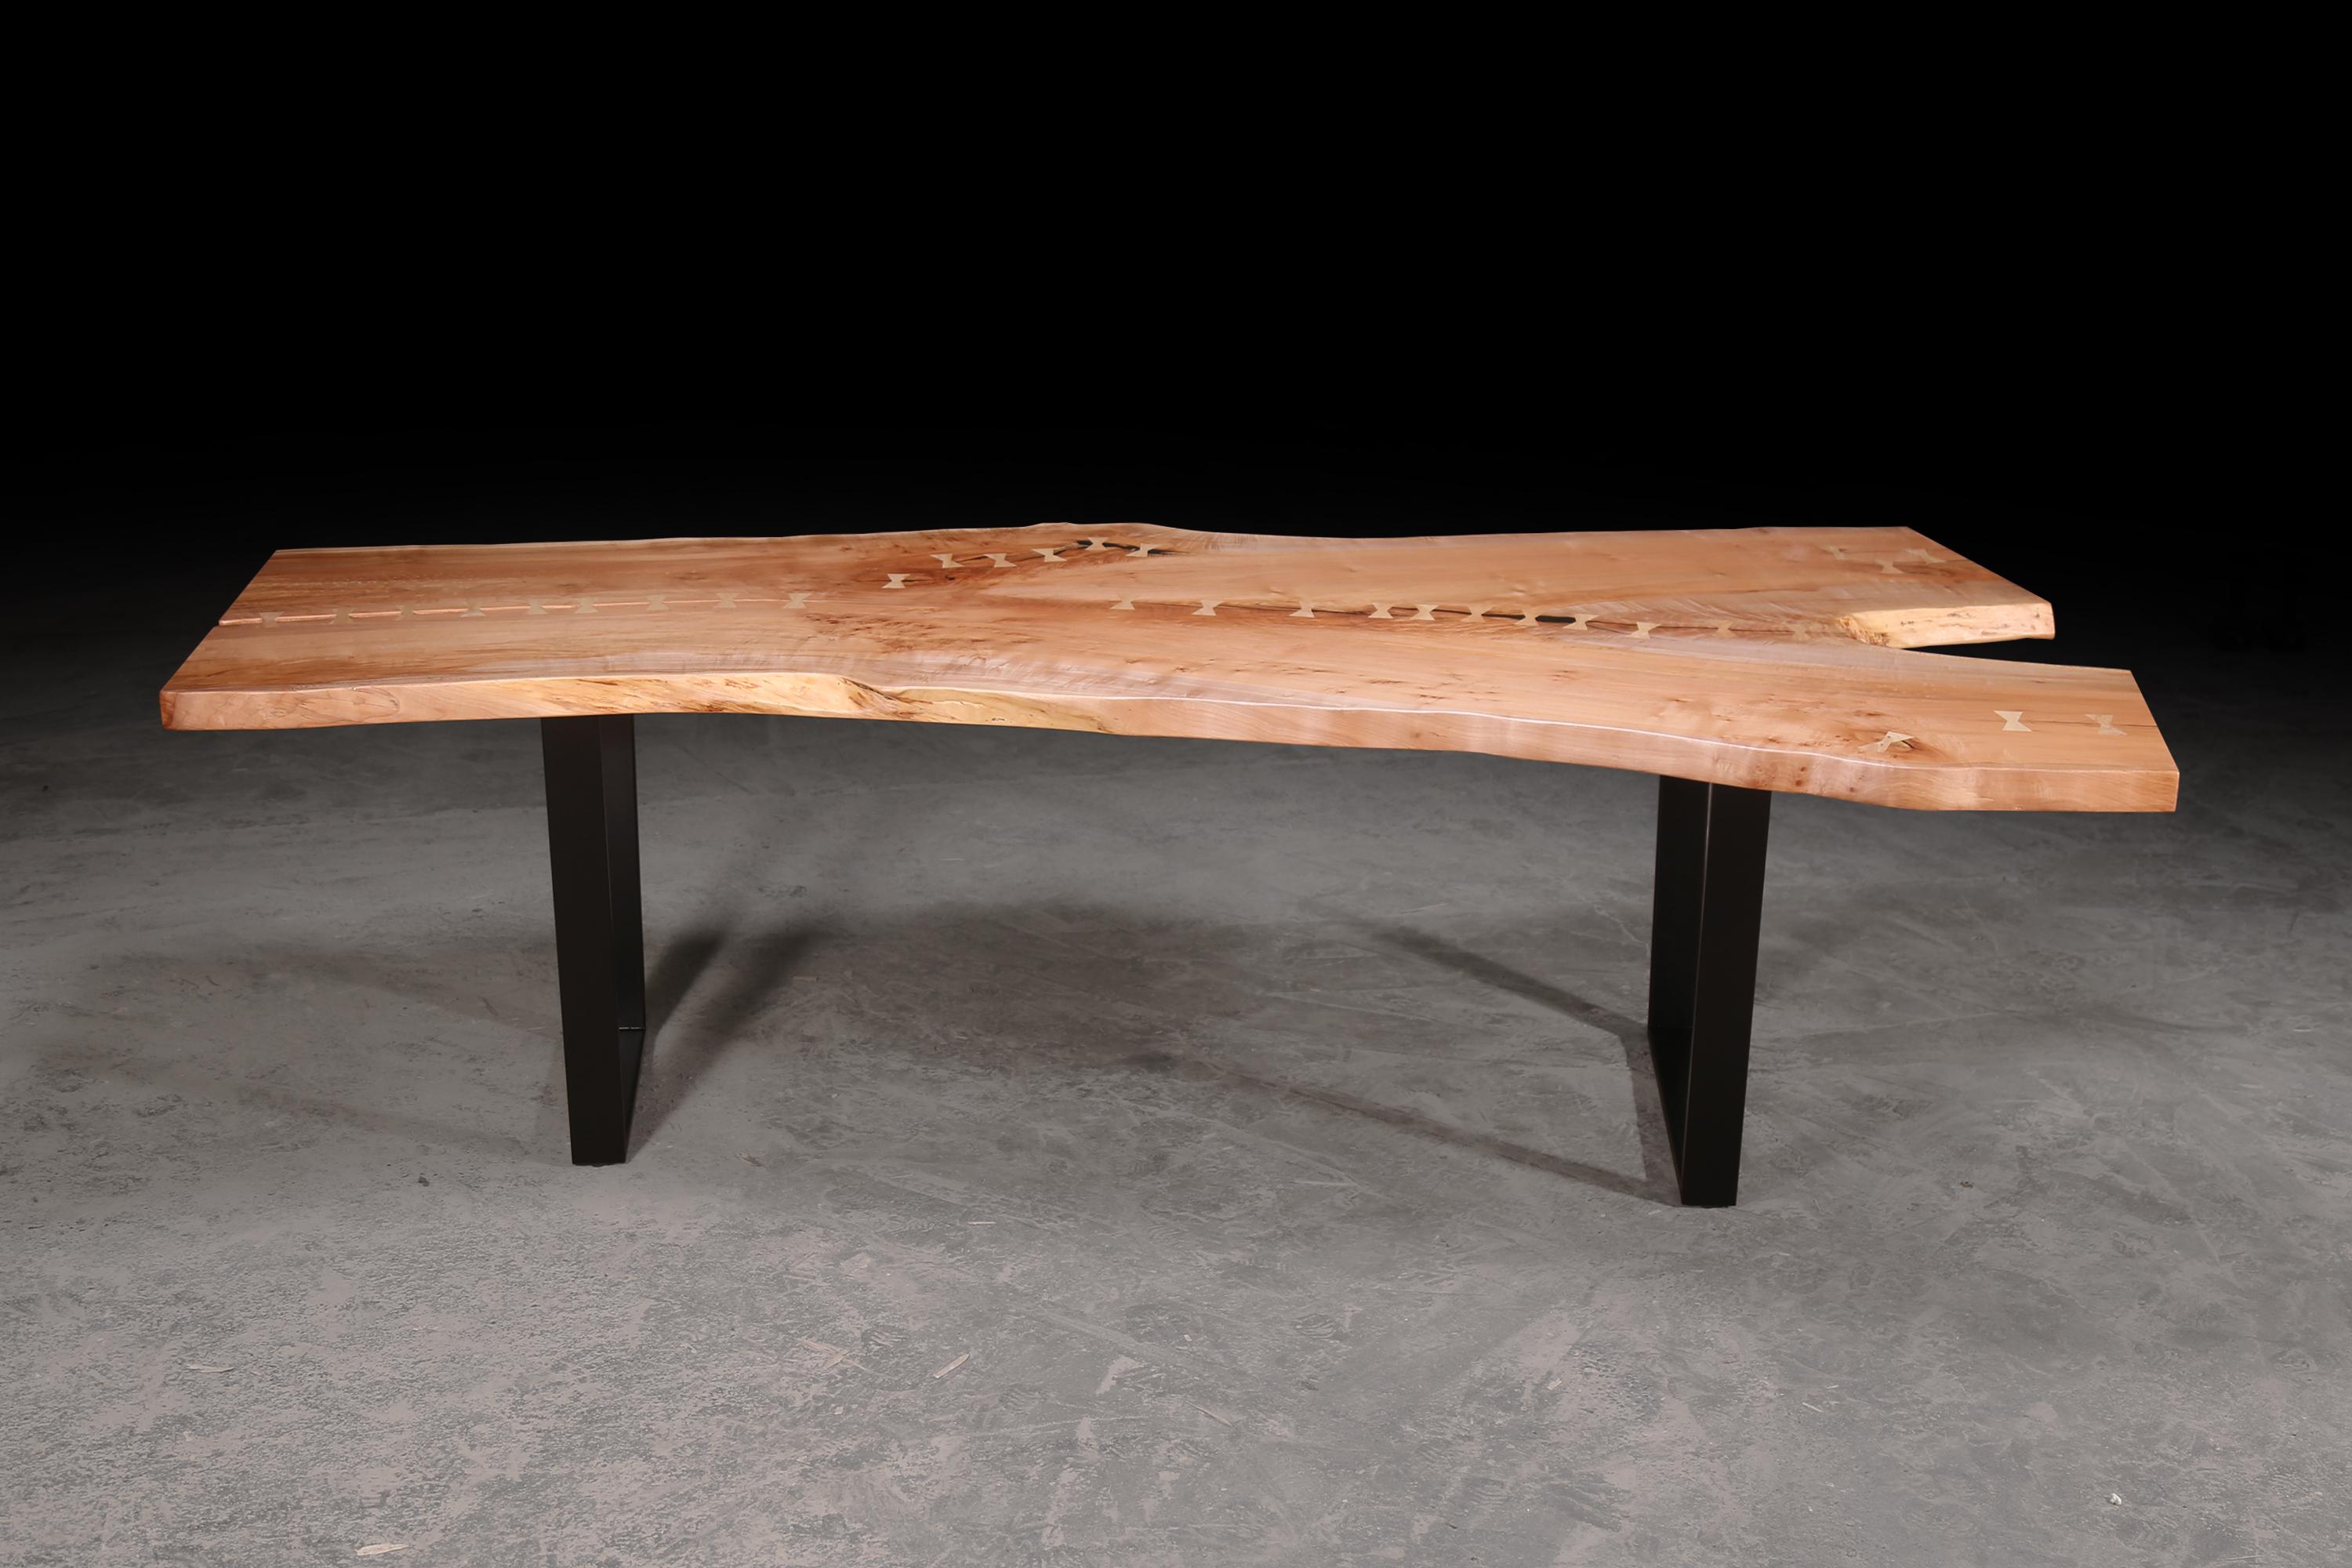 This single maple slab table is made from reclaimed wood from trees that have fallen naturally due to storm, disease or insect damage. Trees grow tall in the Pacific Northwest, and this specific slab came from Oregon. This table can be used as a